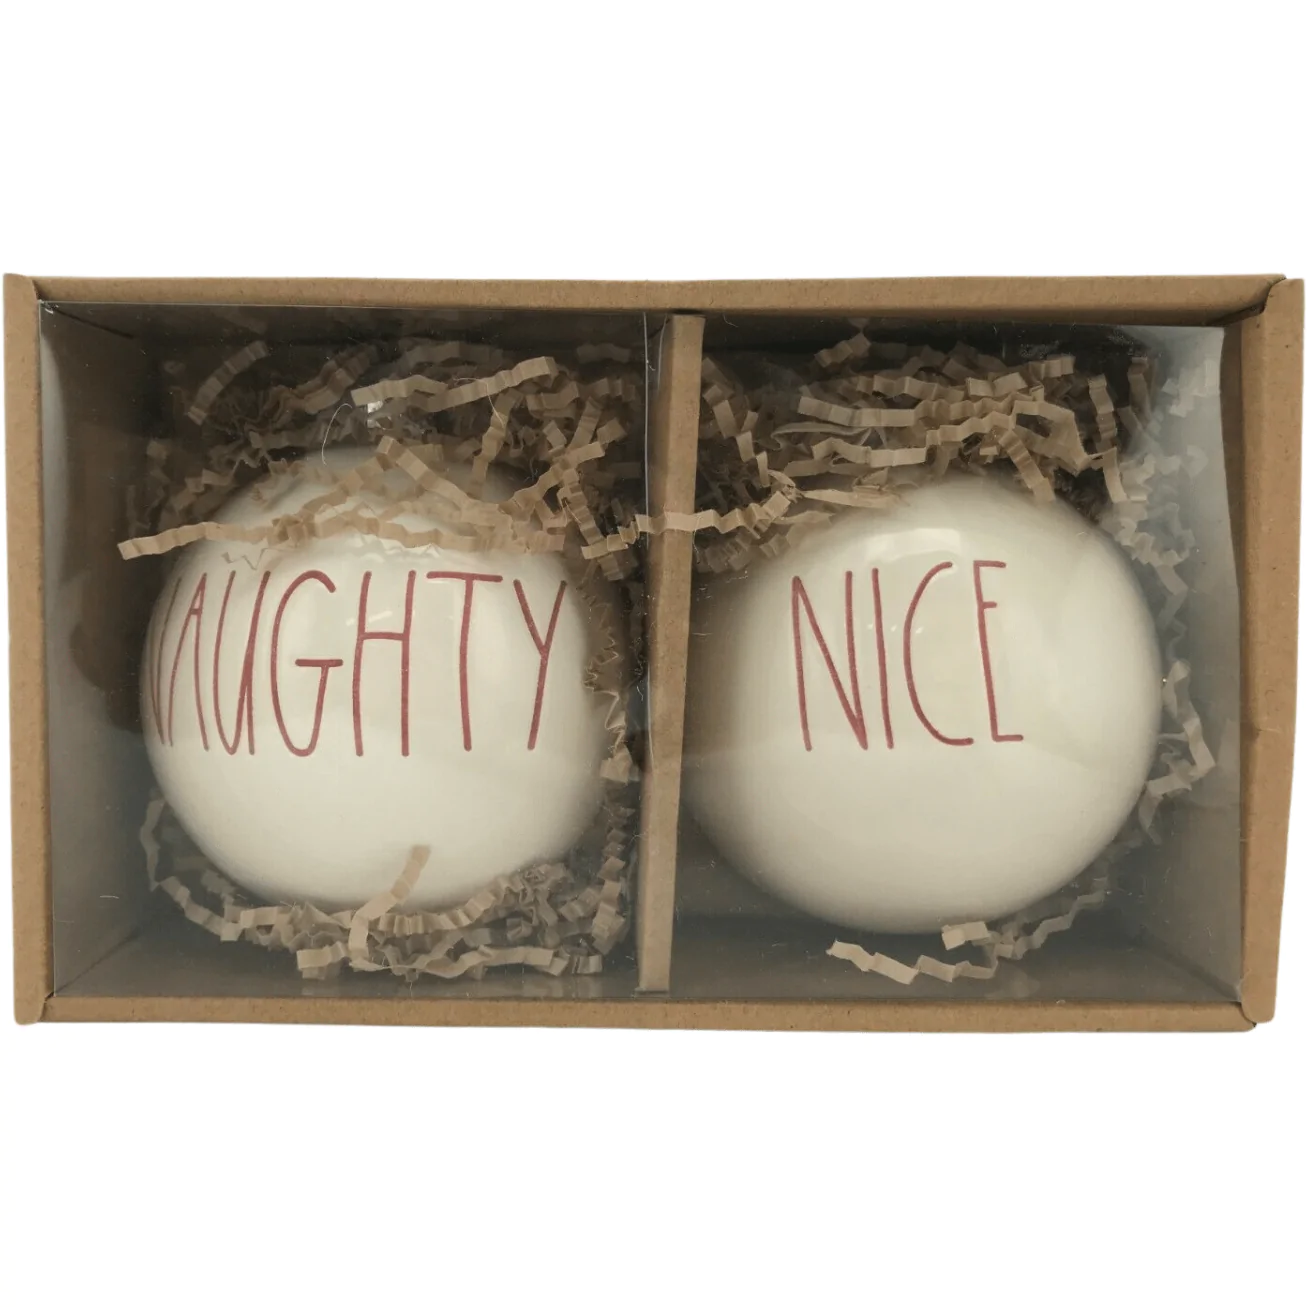 Rae Dunn Christmas Ornament Set / "Naughty" and "Nice" / White & Red **DEALS**